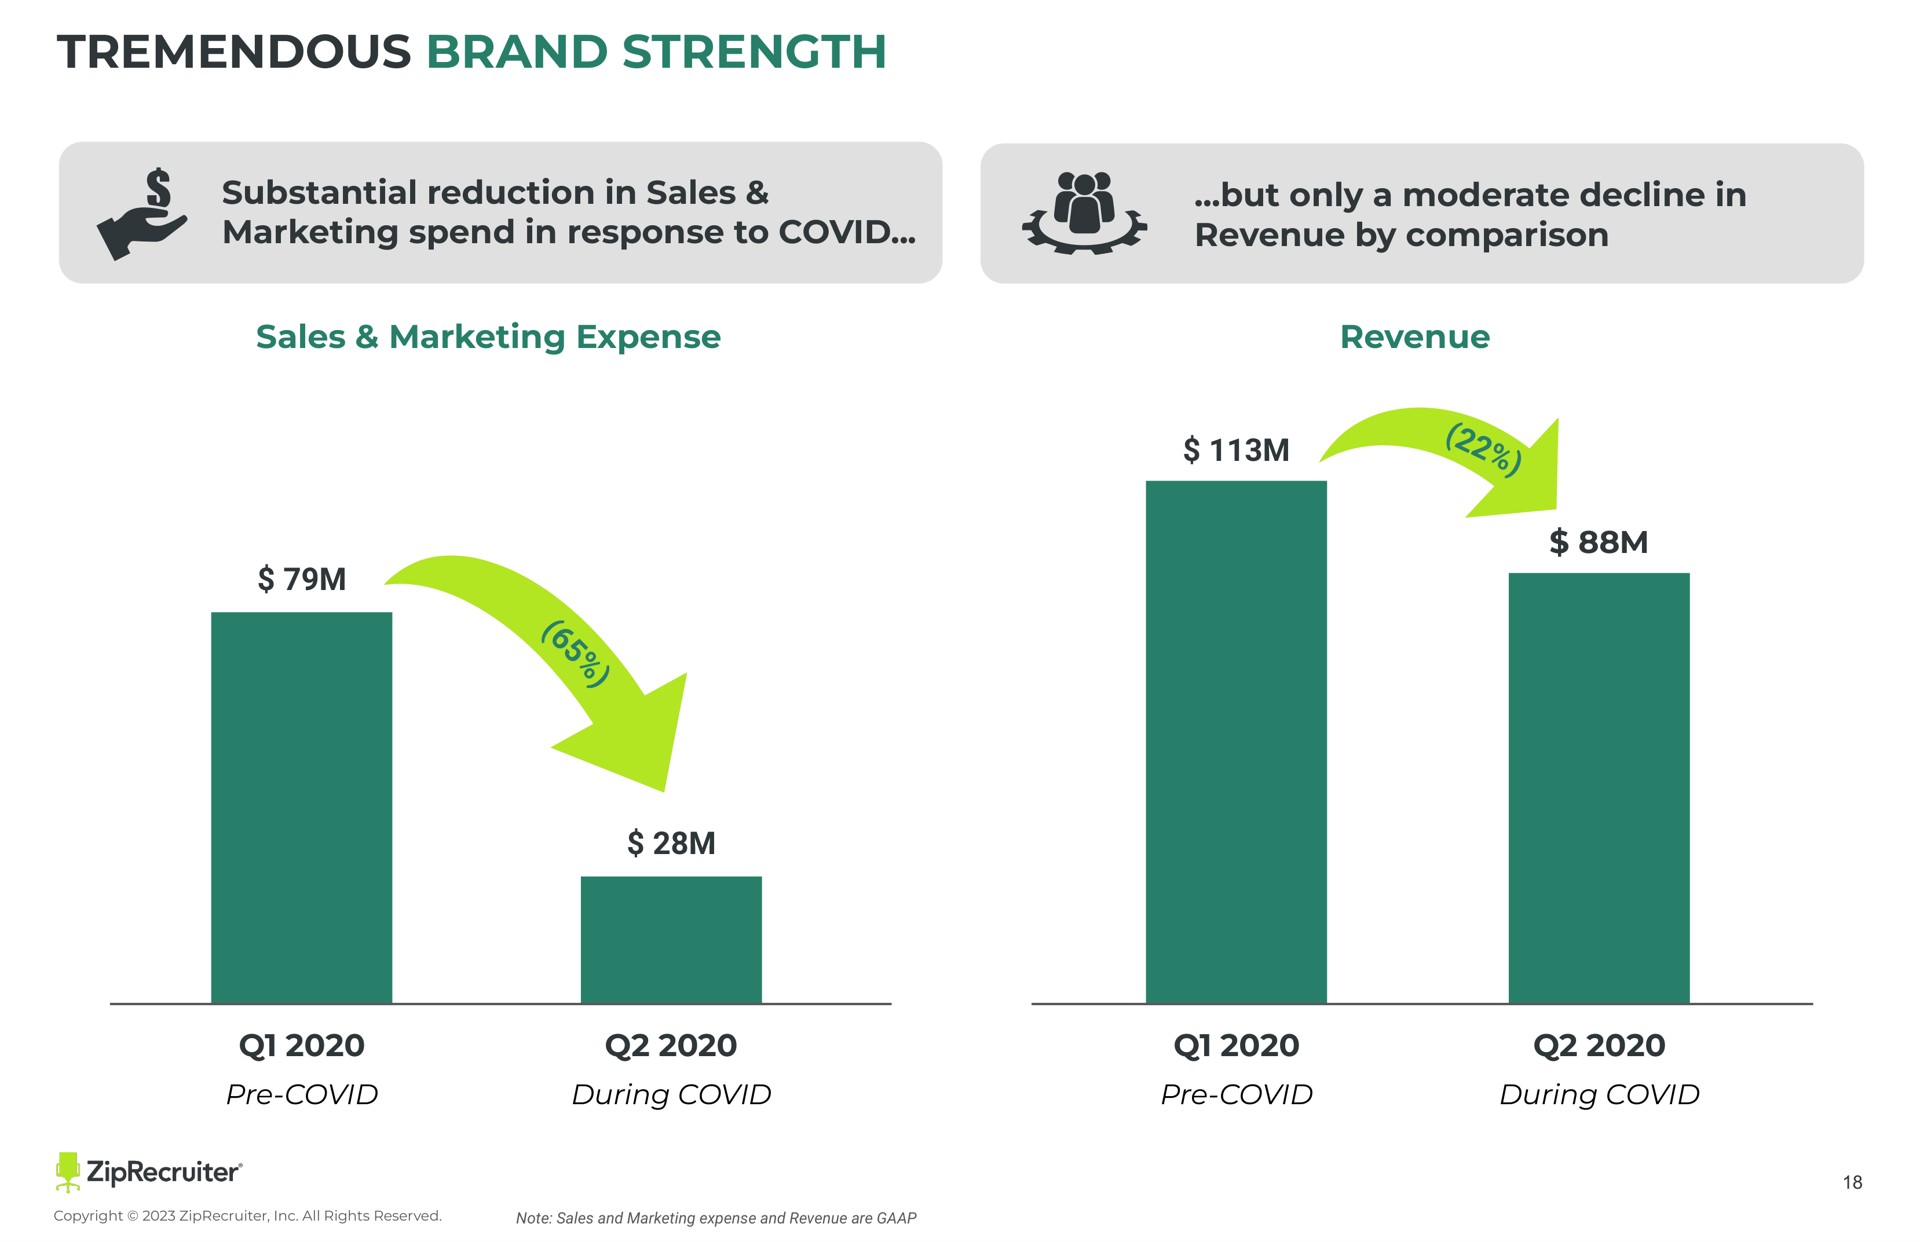 tremendous brand strength substantial reduction in sales marketing spend in response to covid but only a moderate decline in revenue by comparison sales marketing expense revenue rog | ZipRecruiter